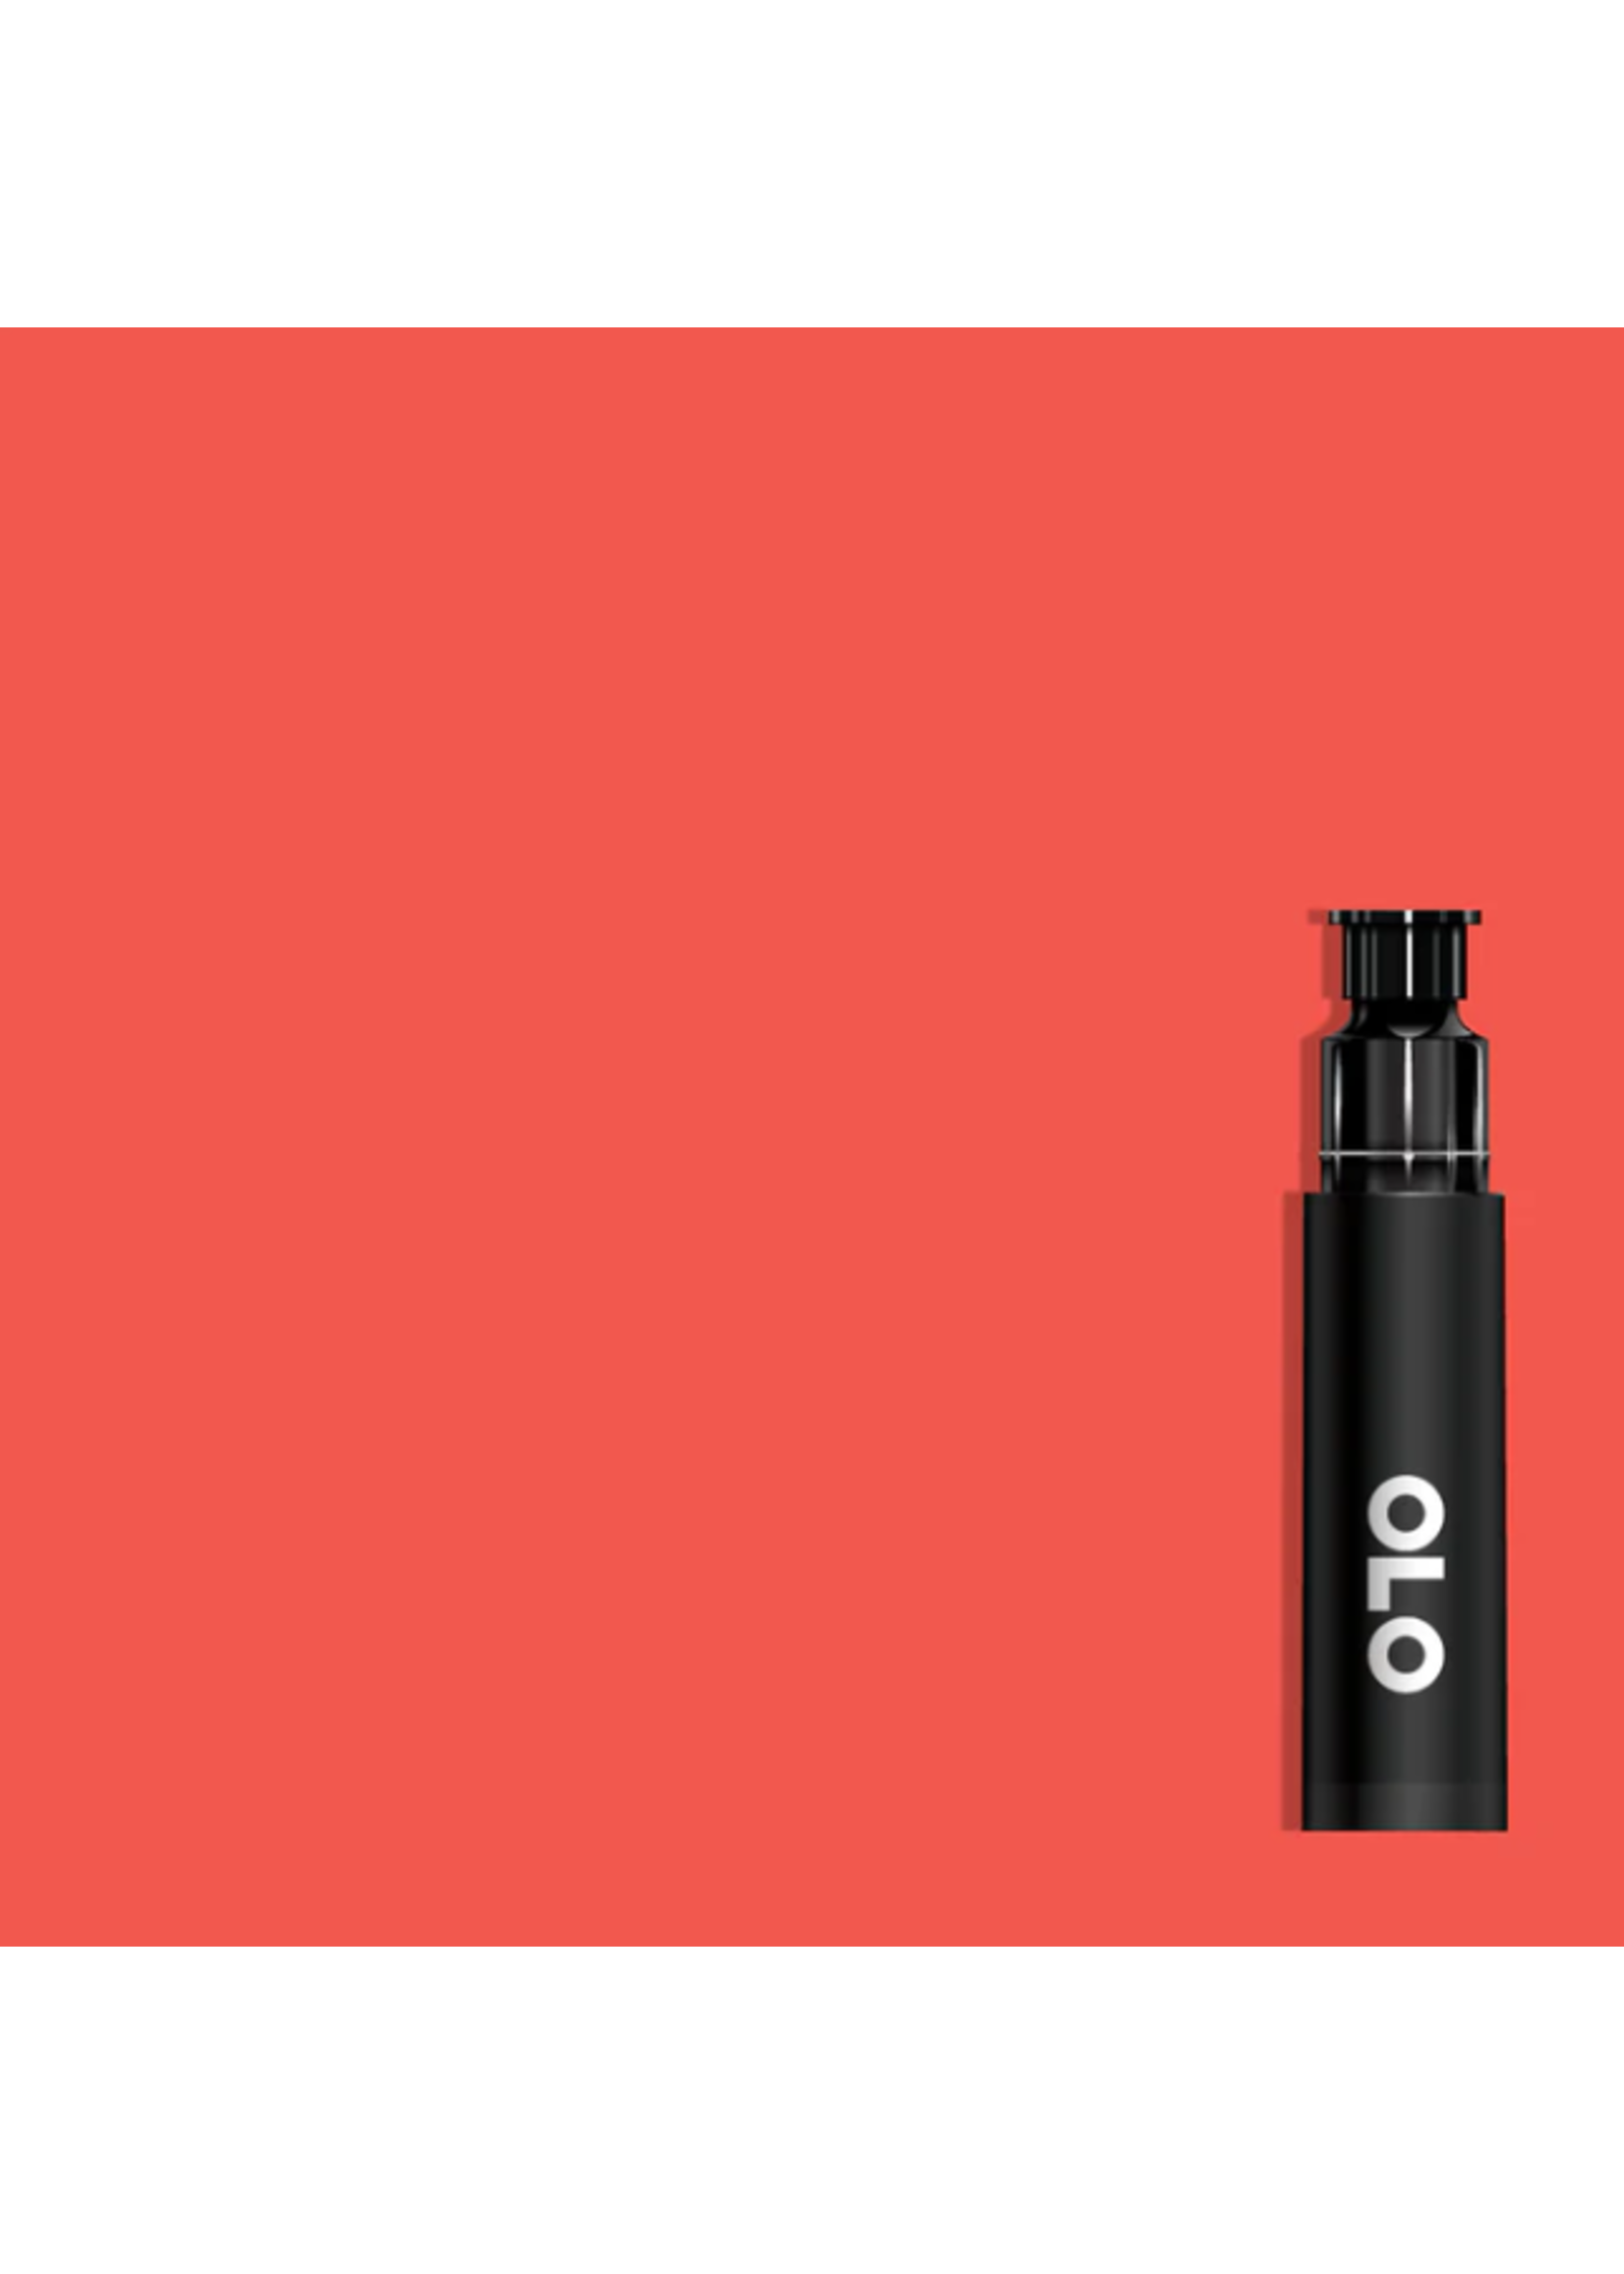 OLO OLO Brush Replacement Cartridge: Coral